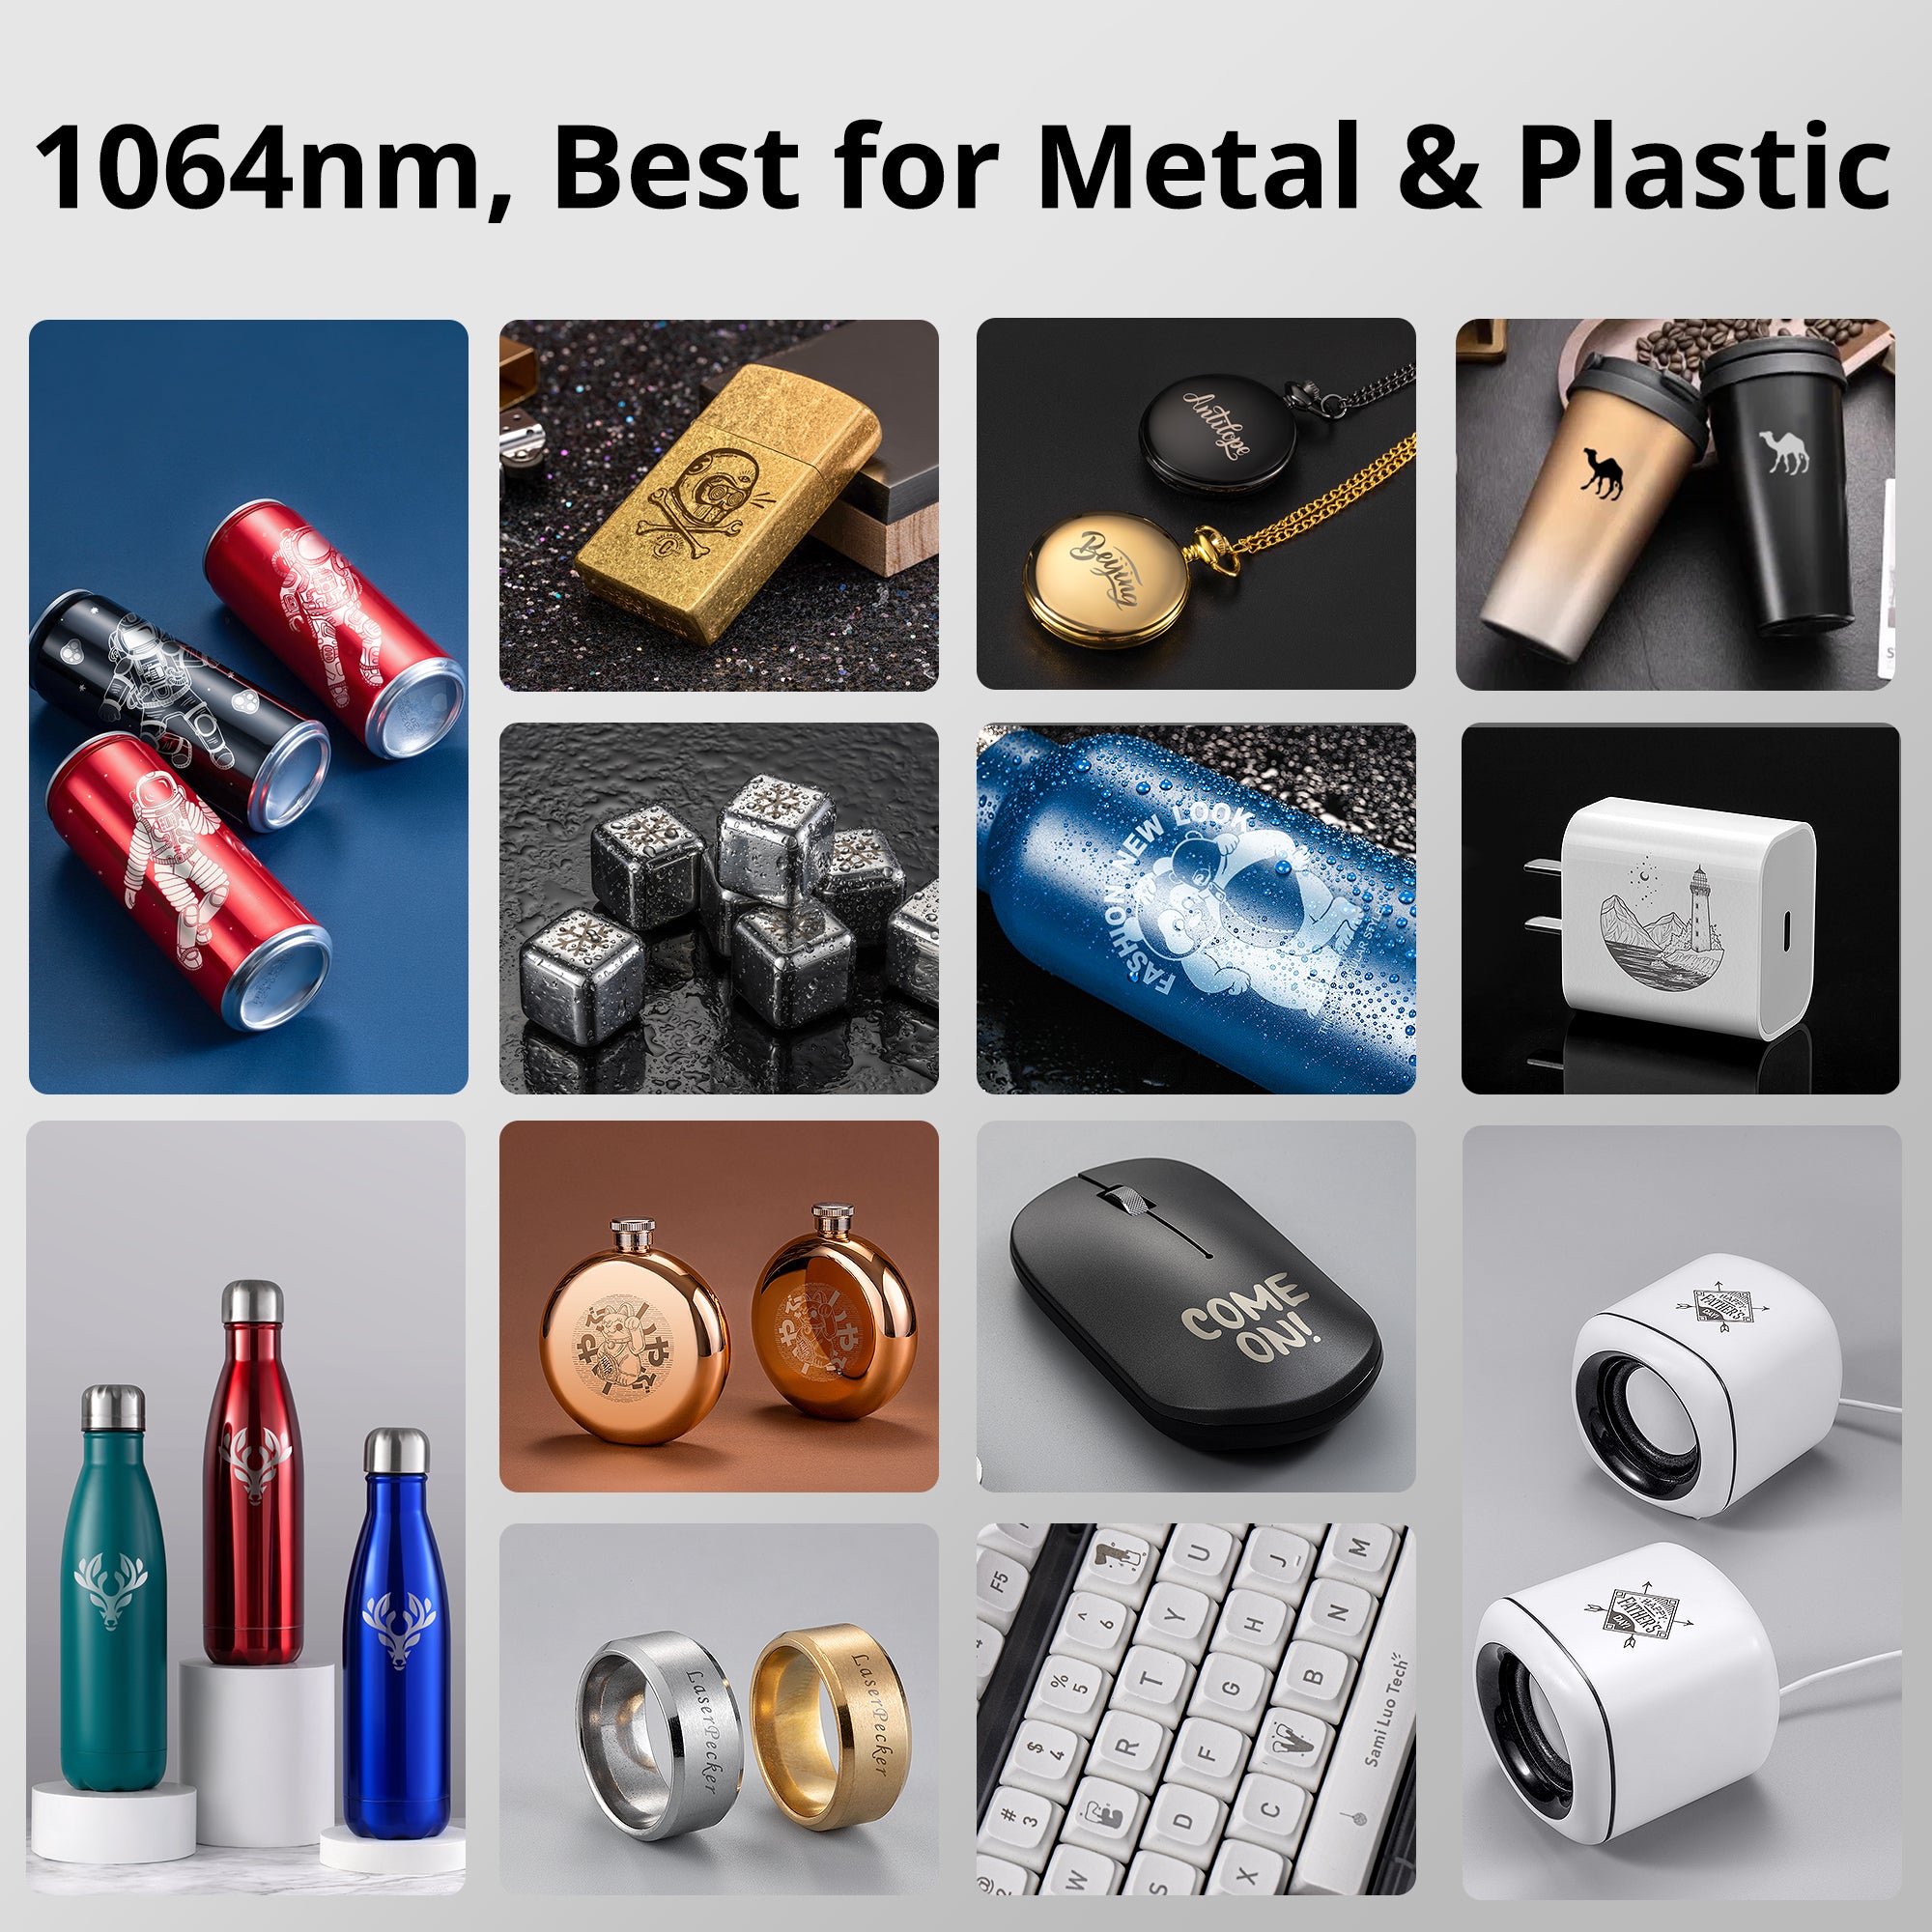 Laserpecker LP3 Best for Metal and Plastic